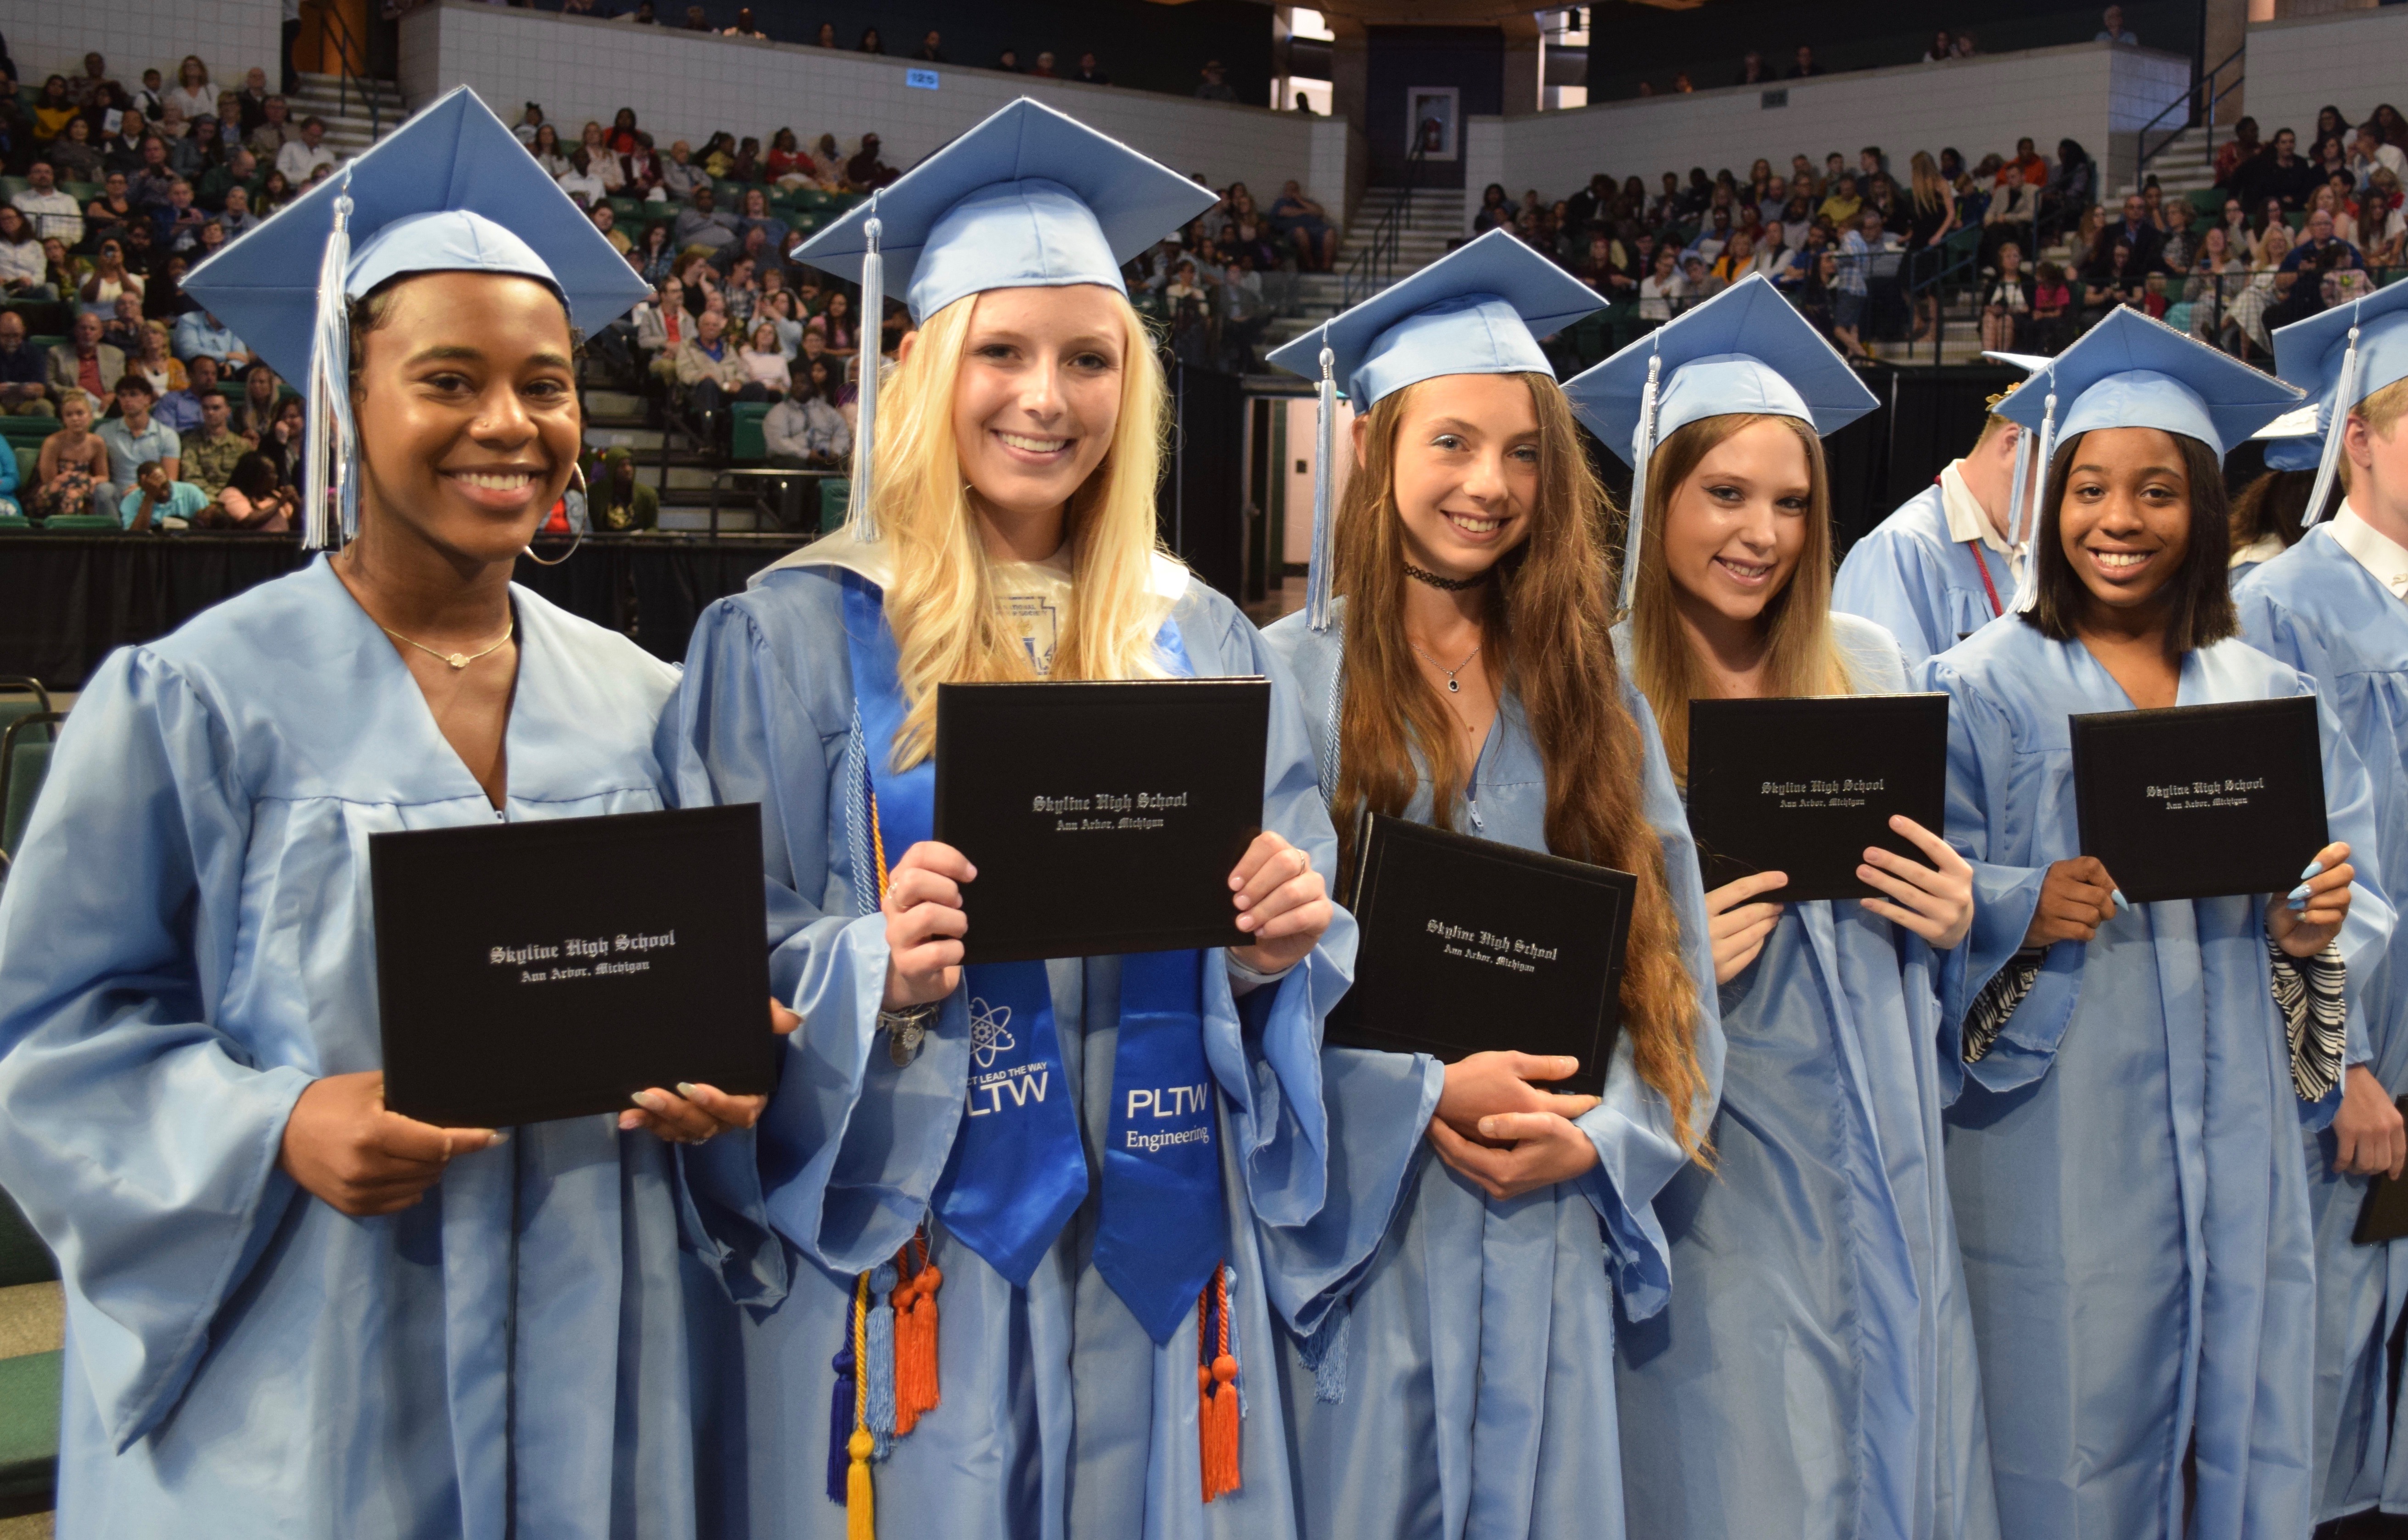 5 female members of the Skyline High School class of 2019 holding their diplomas at graduation